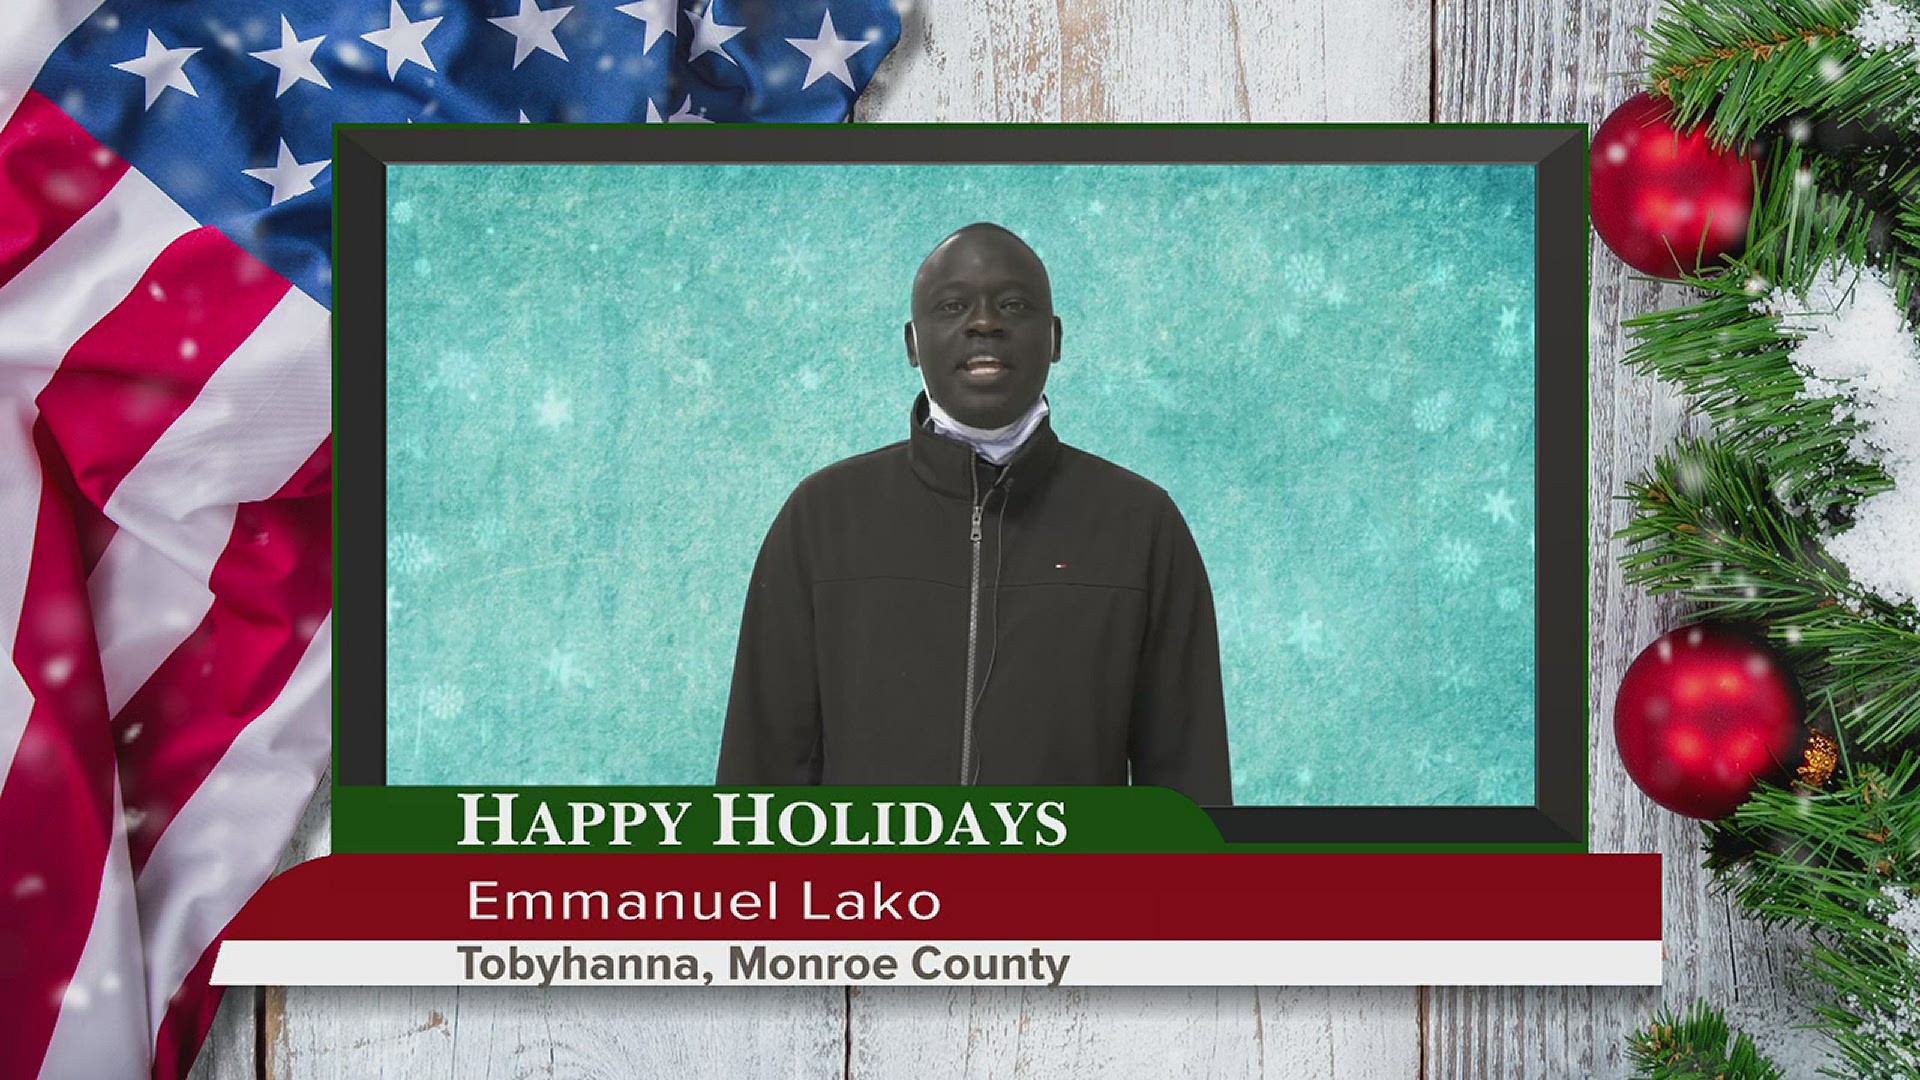 "I wish all my friends and family members at Tobyhanna Army Depot a happy, merry Christmas."